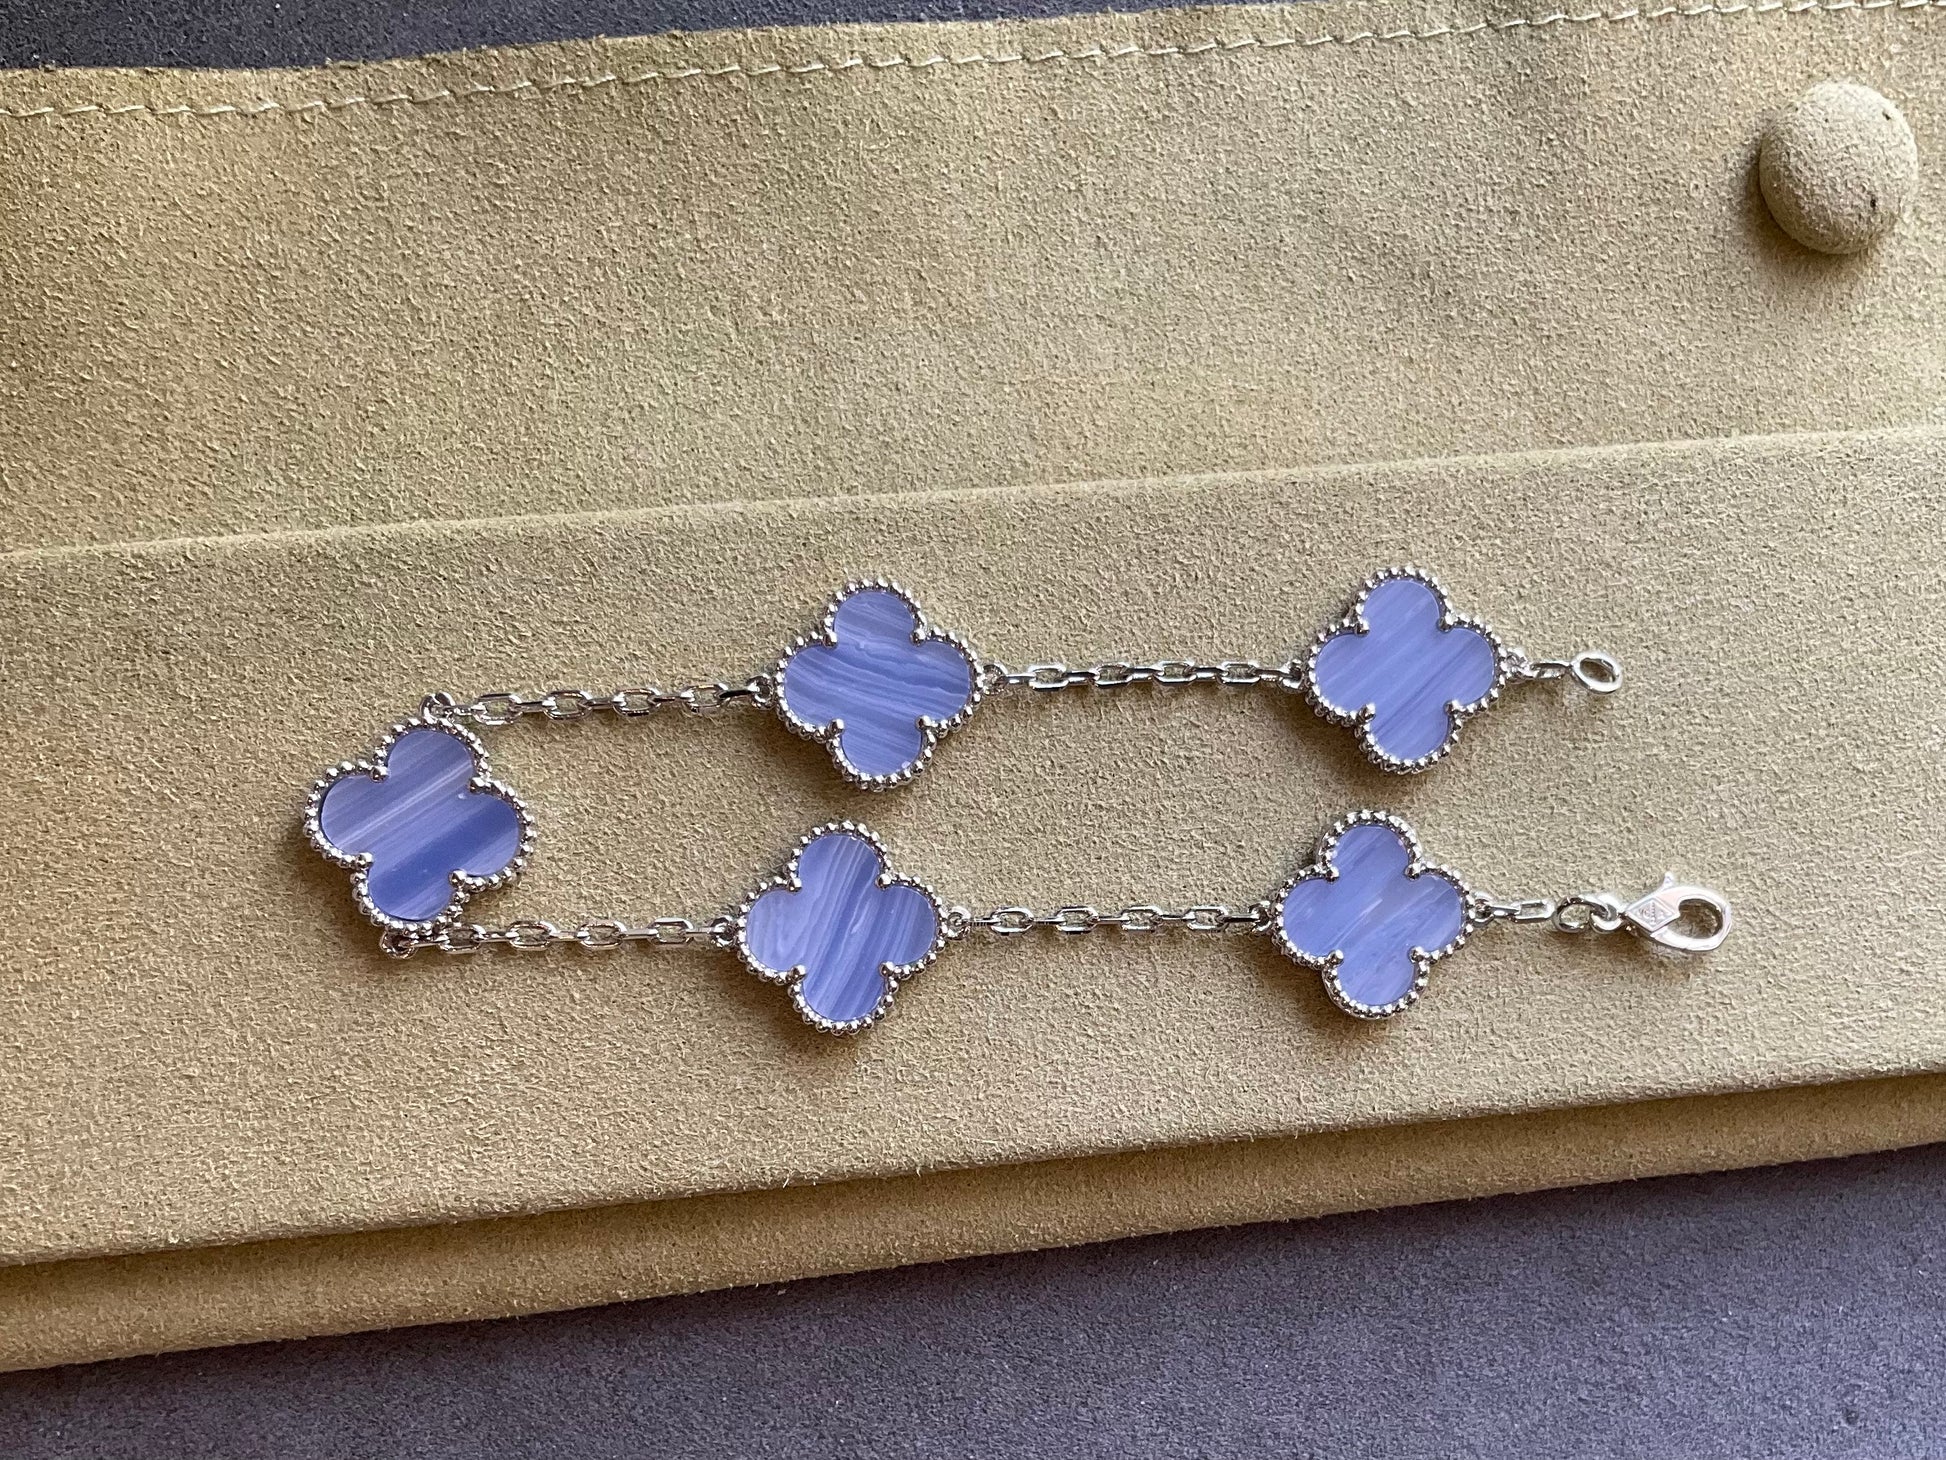 5 motifs 15mm clover chalcedony clover bracelet 925 silver with 18k white gold plated 7.5 inches - ParadiseKissCo